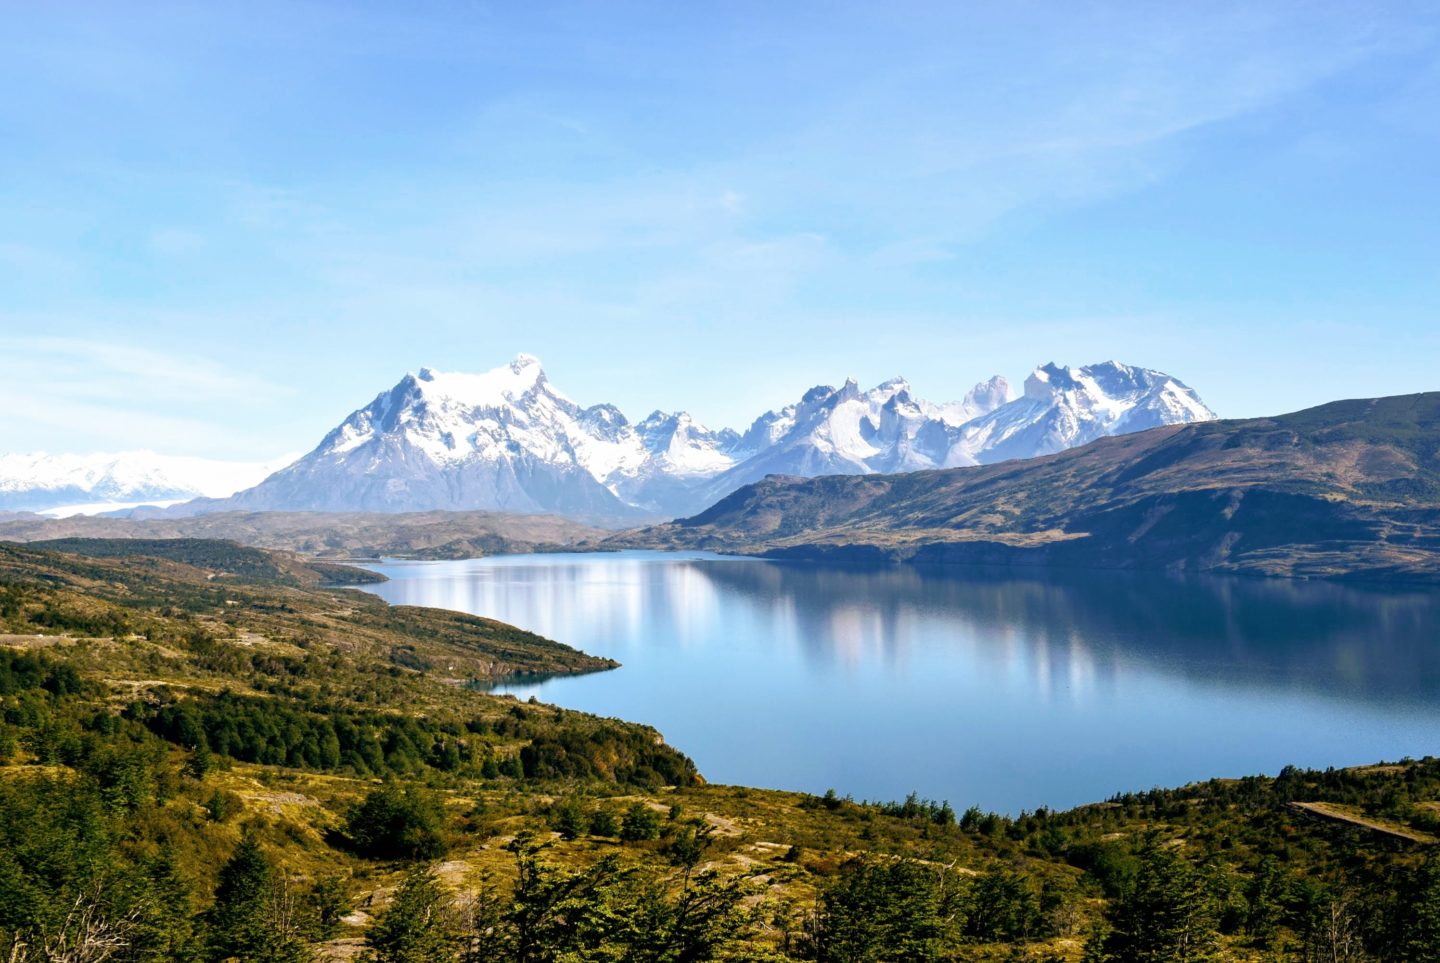 An image of the stunning mountain scenery at Torres del Paine National Park